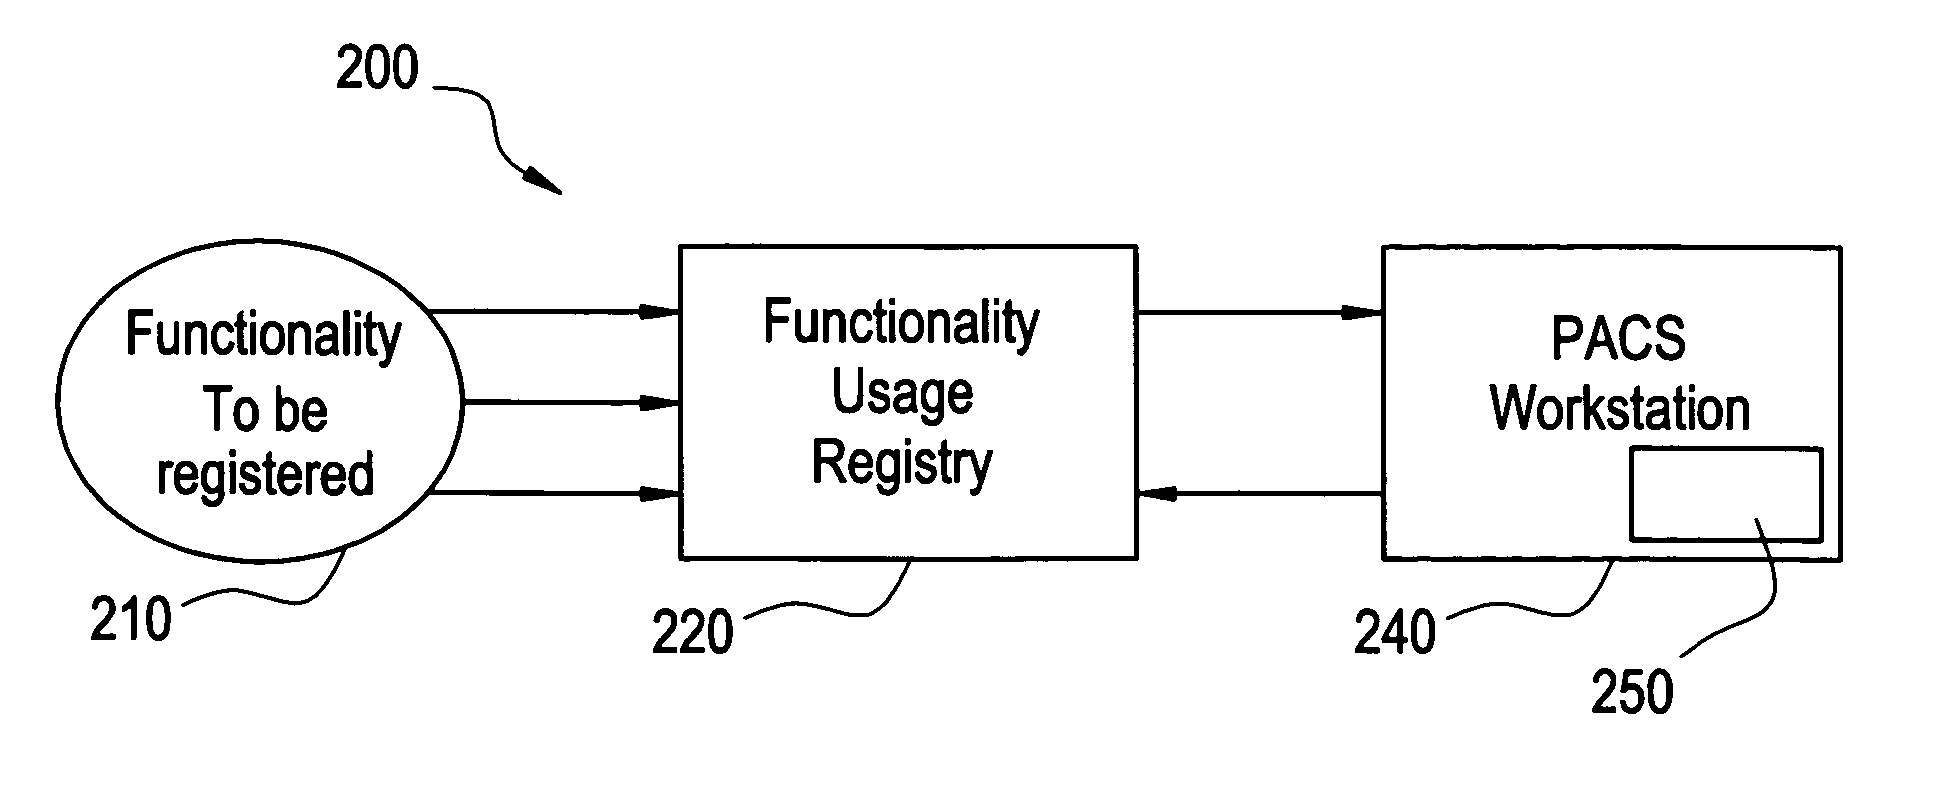 Self-learning adaptive PACS workstation system and method